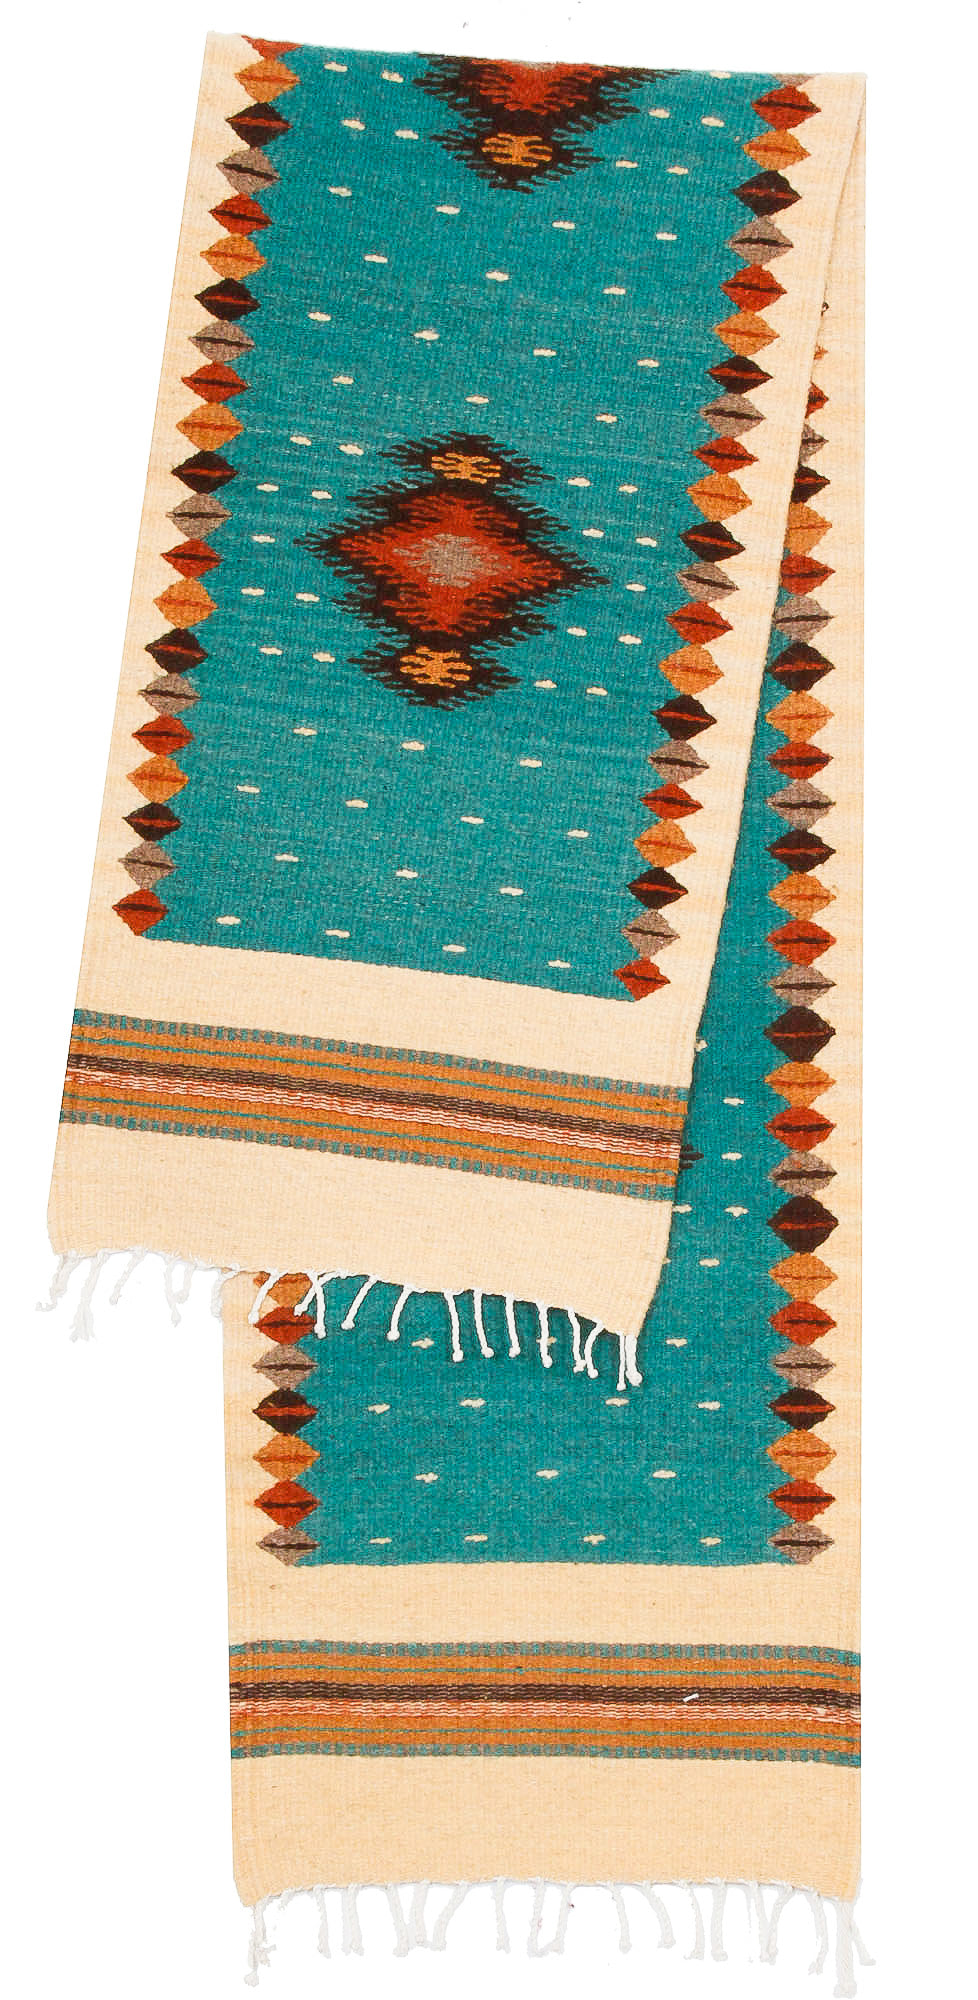 Handwoven Zapotec Indian Table Runner - Soplador Turquoise Wool Oaxacan Textile